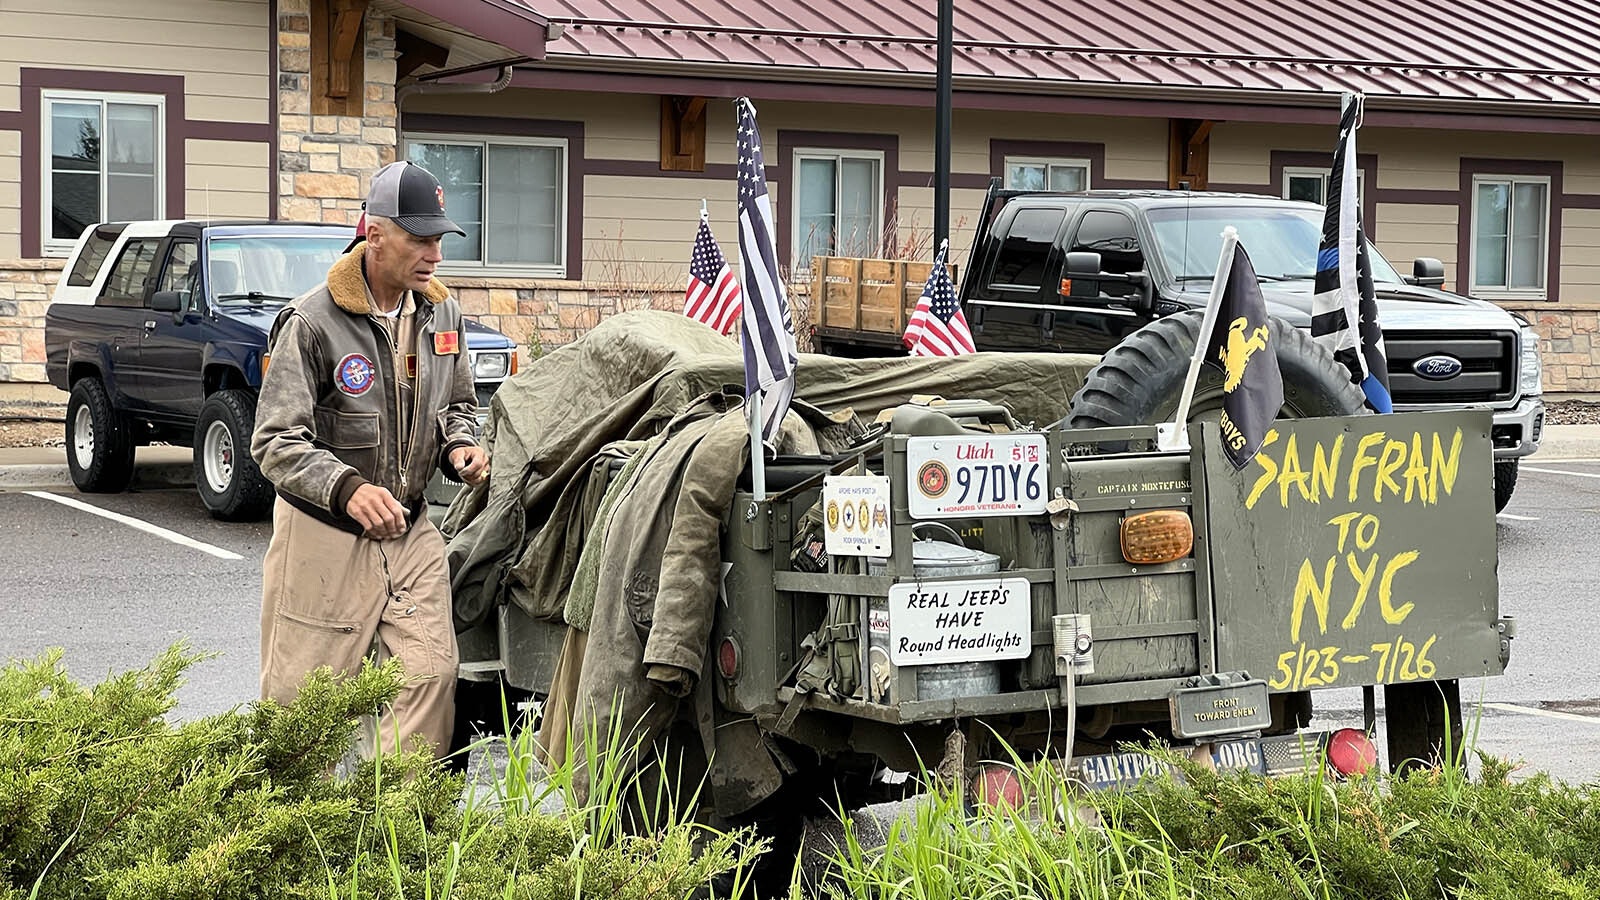 Capt. Scott Montefusco secures Little Glory, his 1952 Willys Jeep, after rolling into Laramie recently.